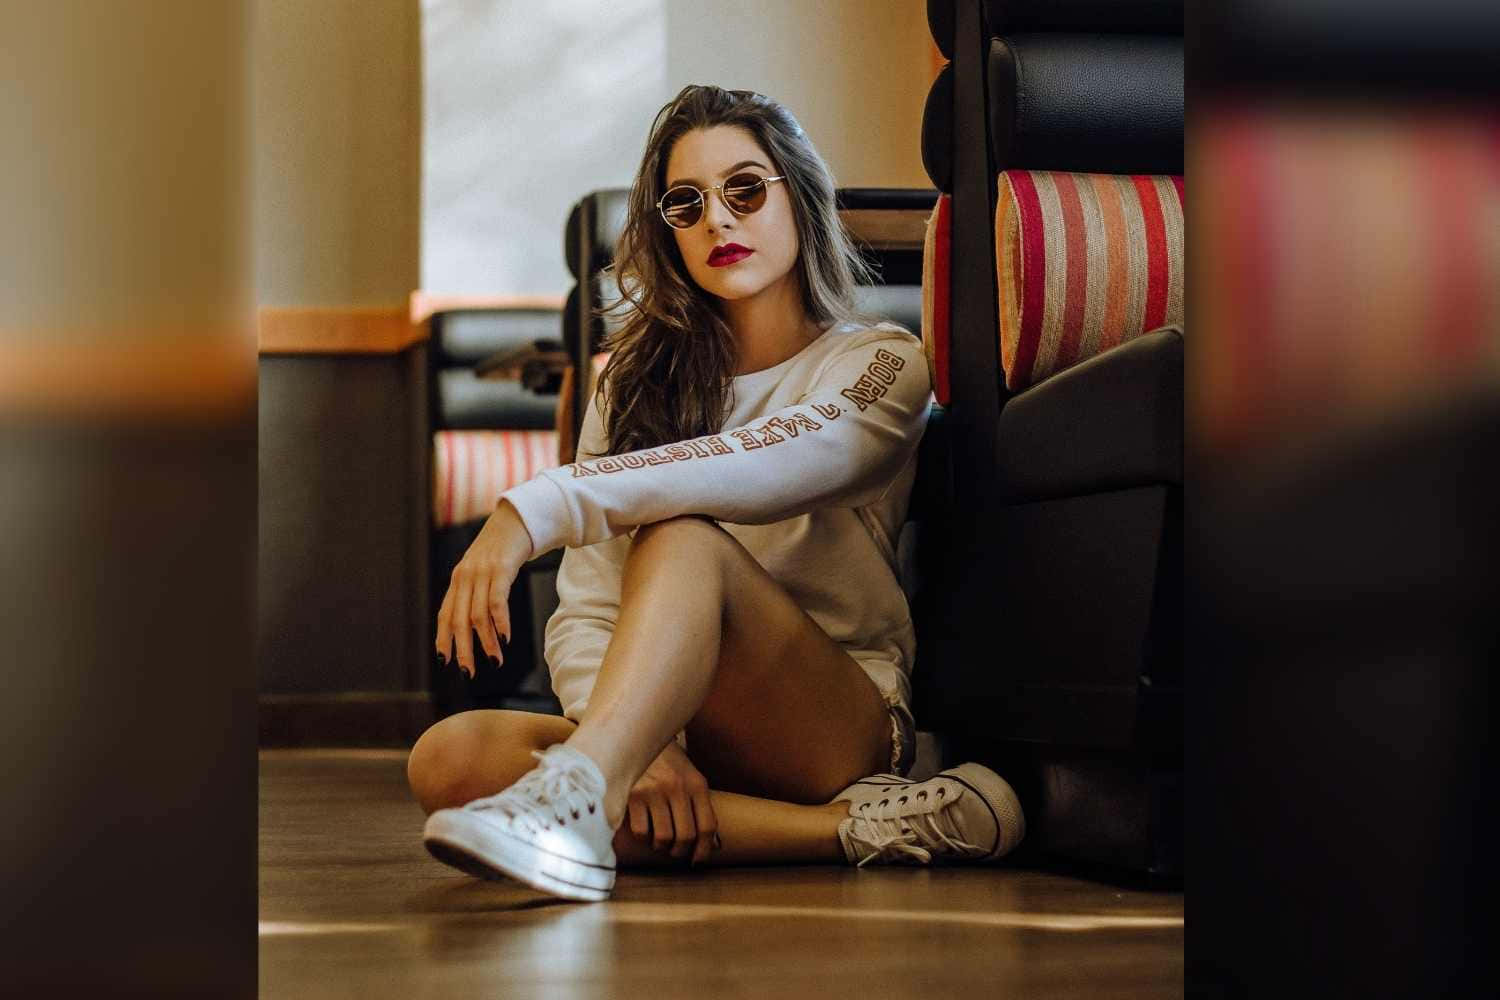 Sunglasses Girl Sitting Pose Picture